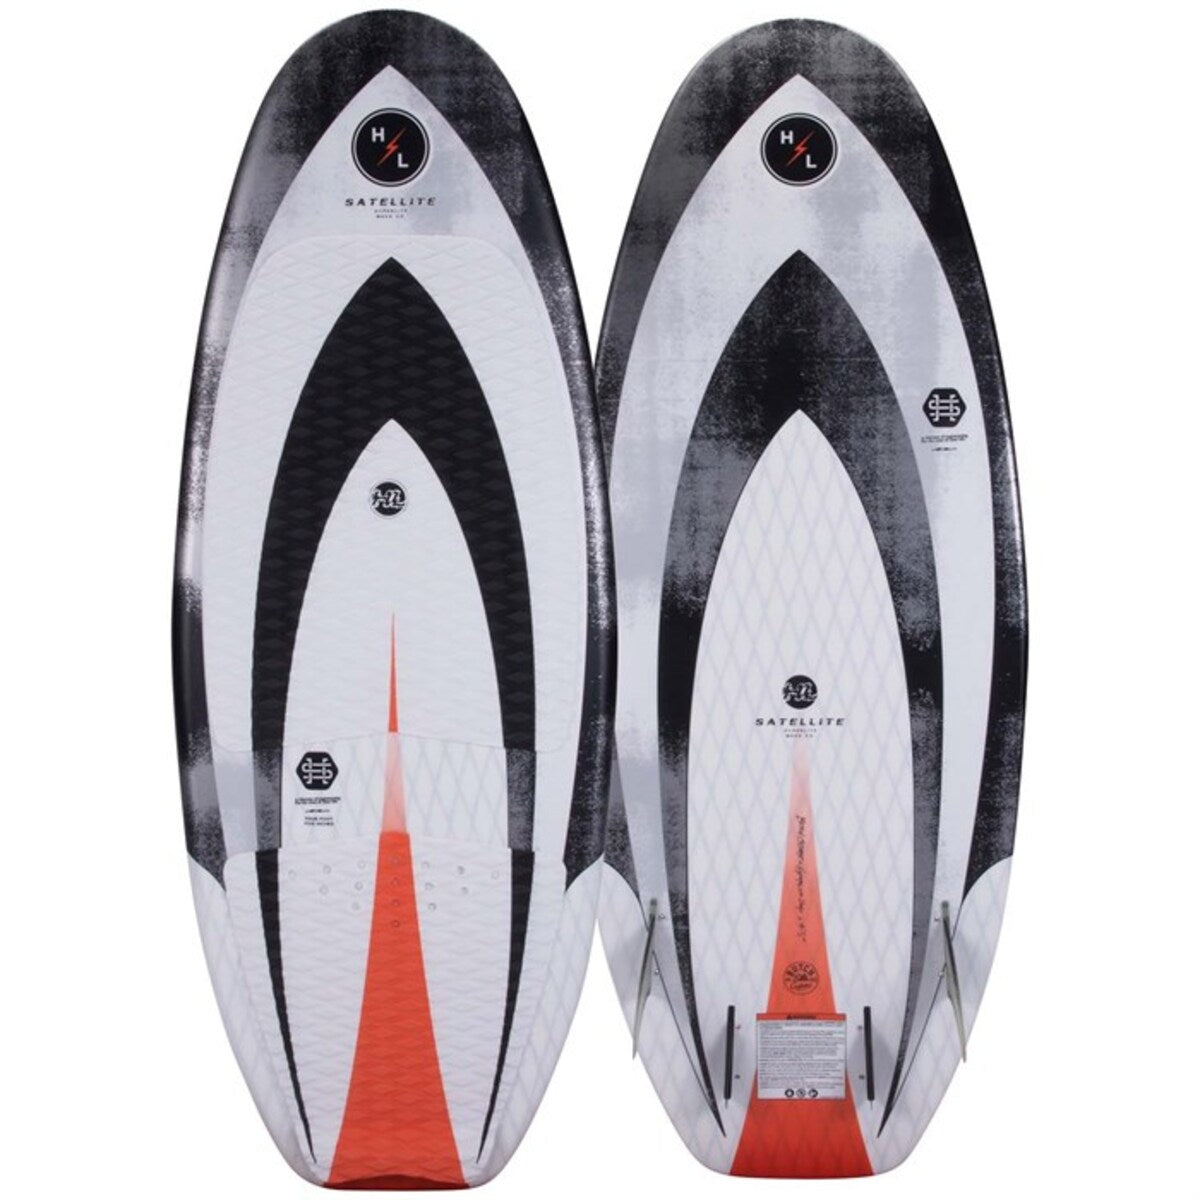 top(left) and bottom(right) view of the Hyperlite Satellite Surfboard